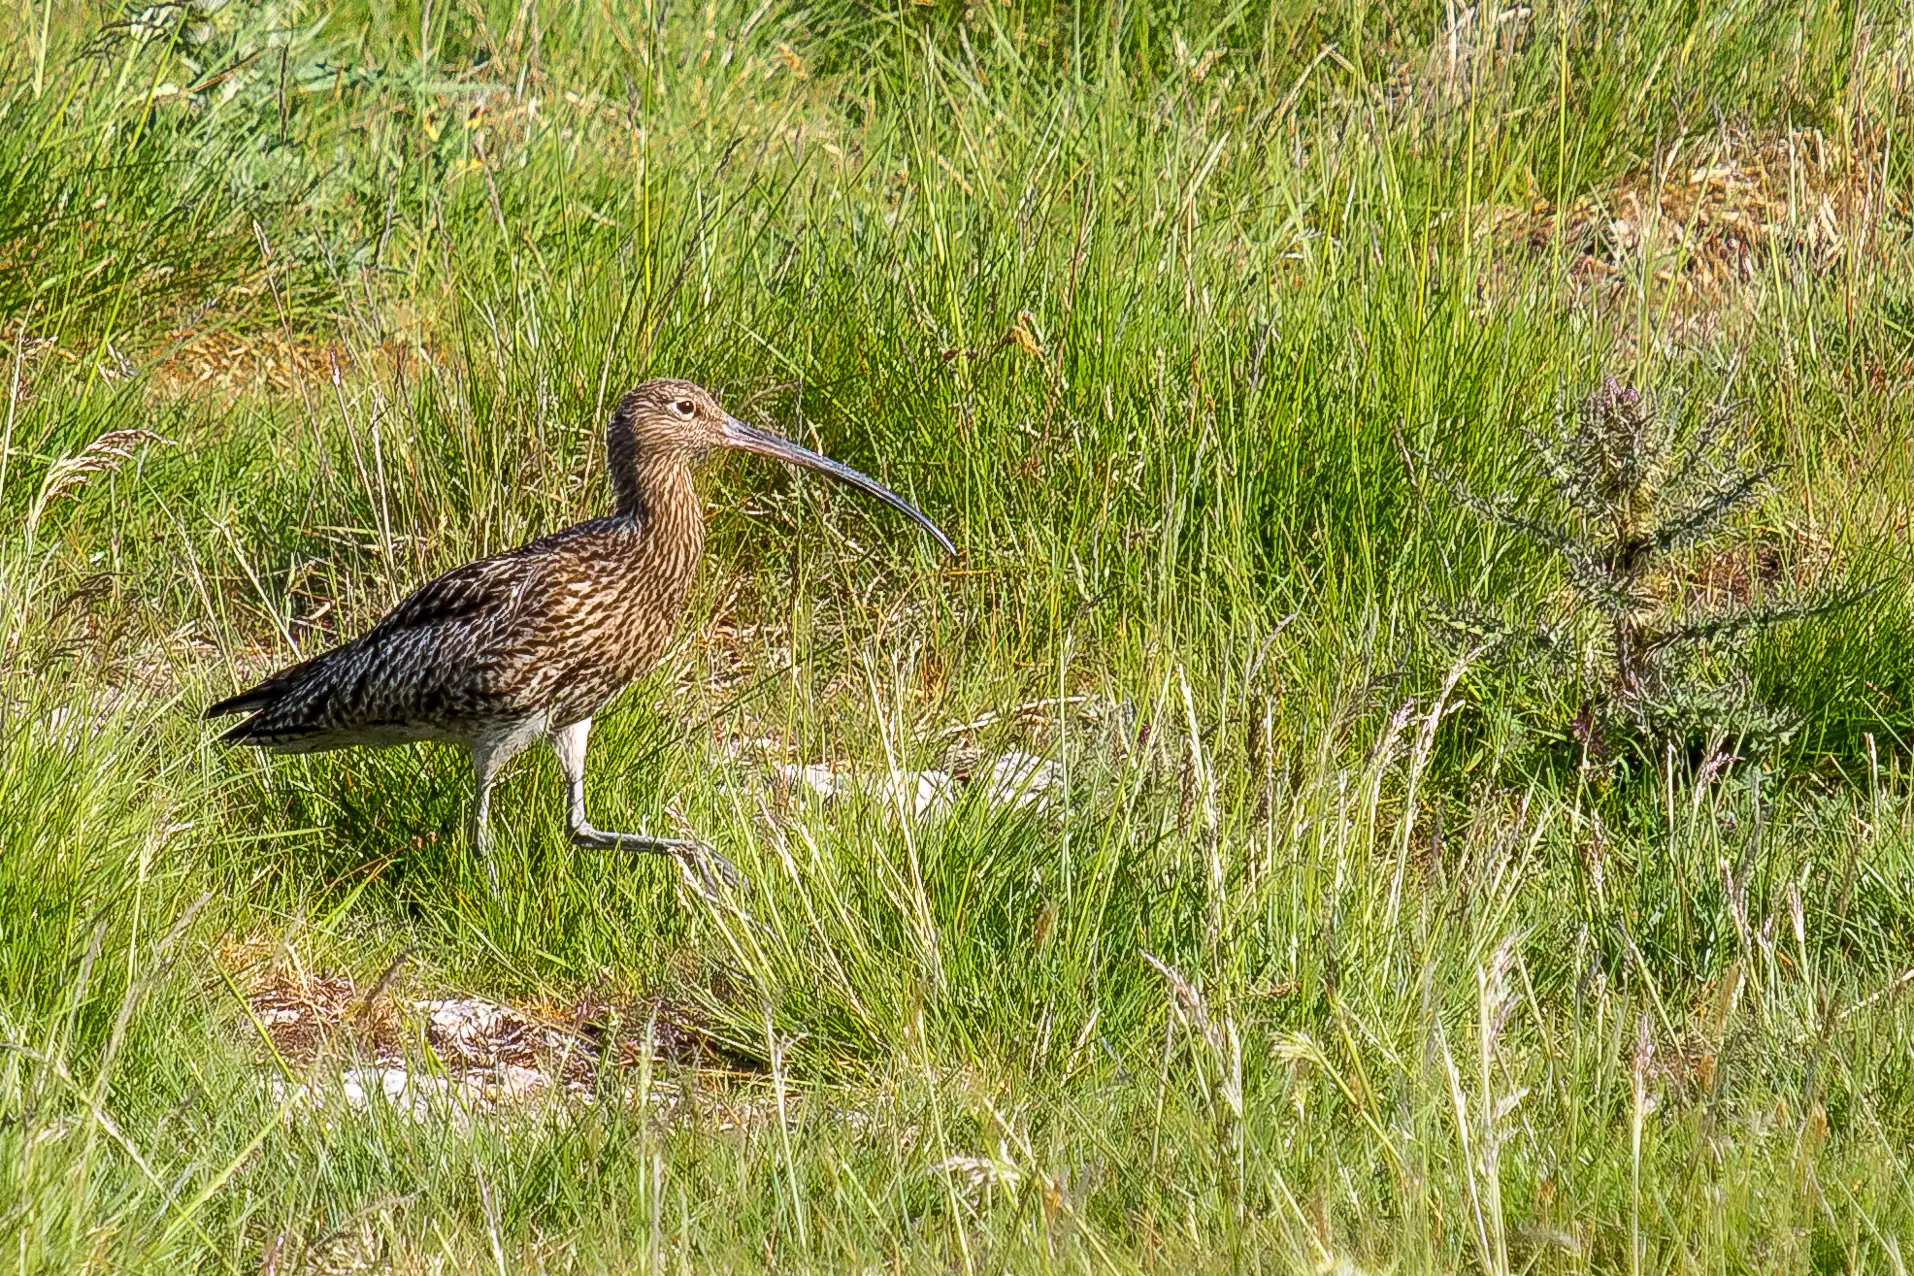 feeding curlew in the yorkshire dales on the hawes kettlewell road.